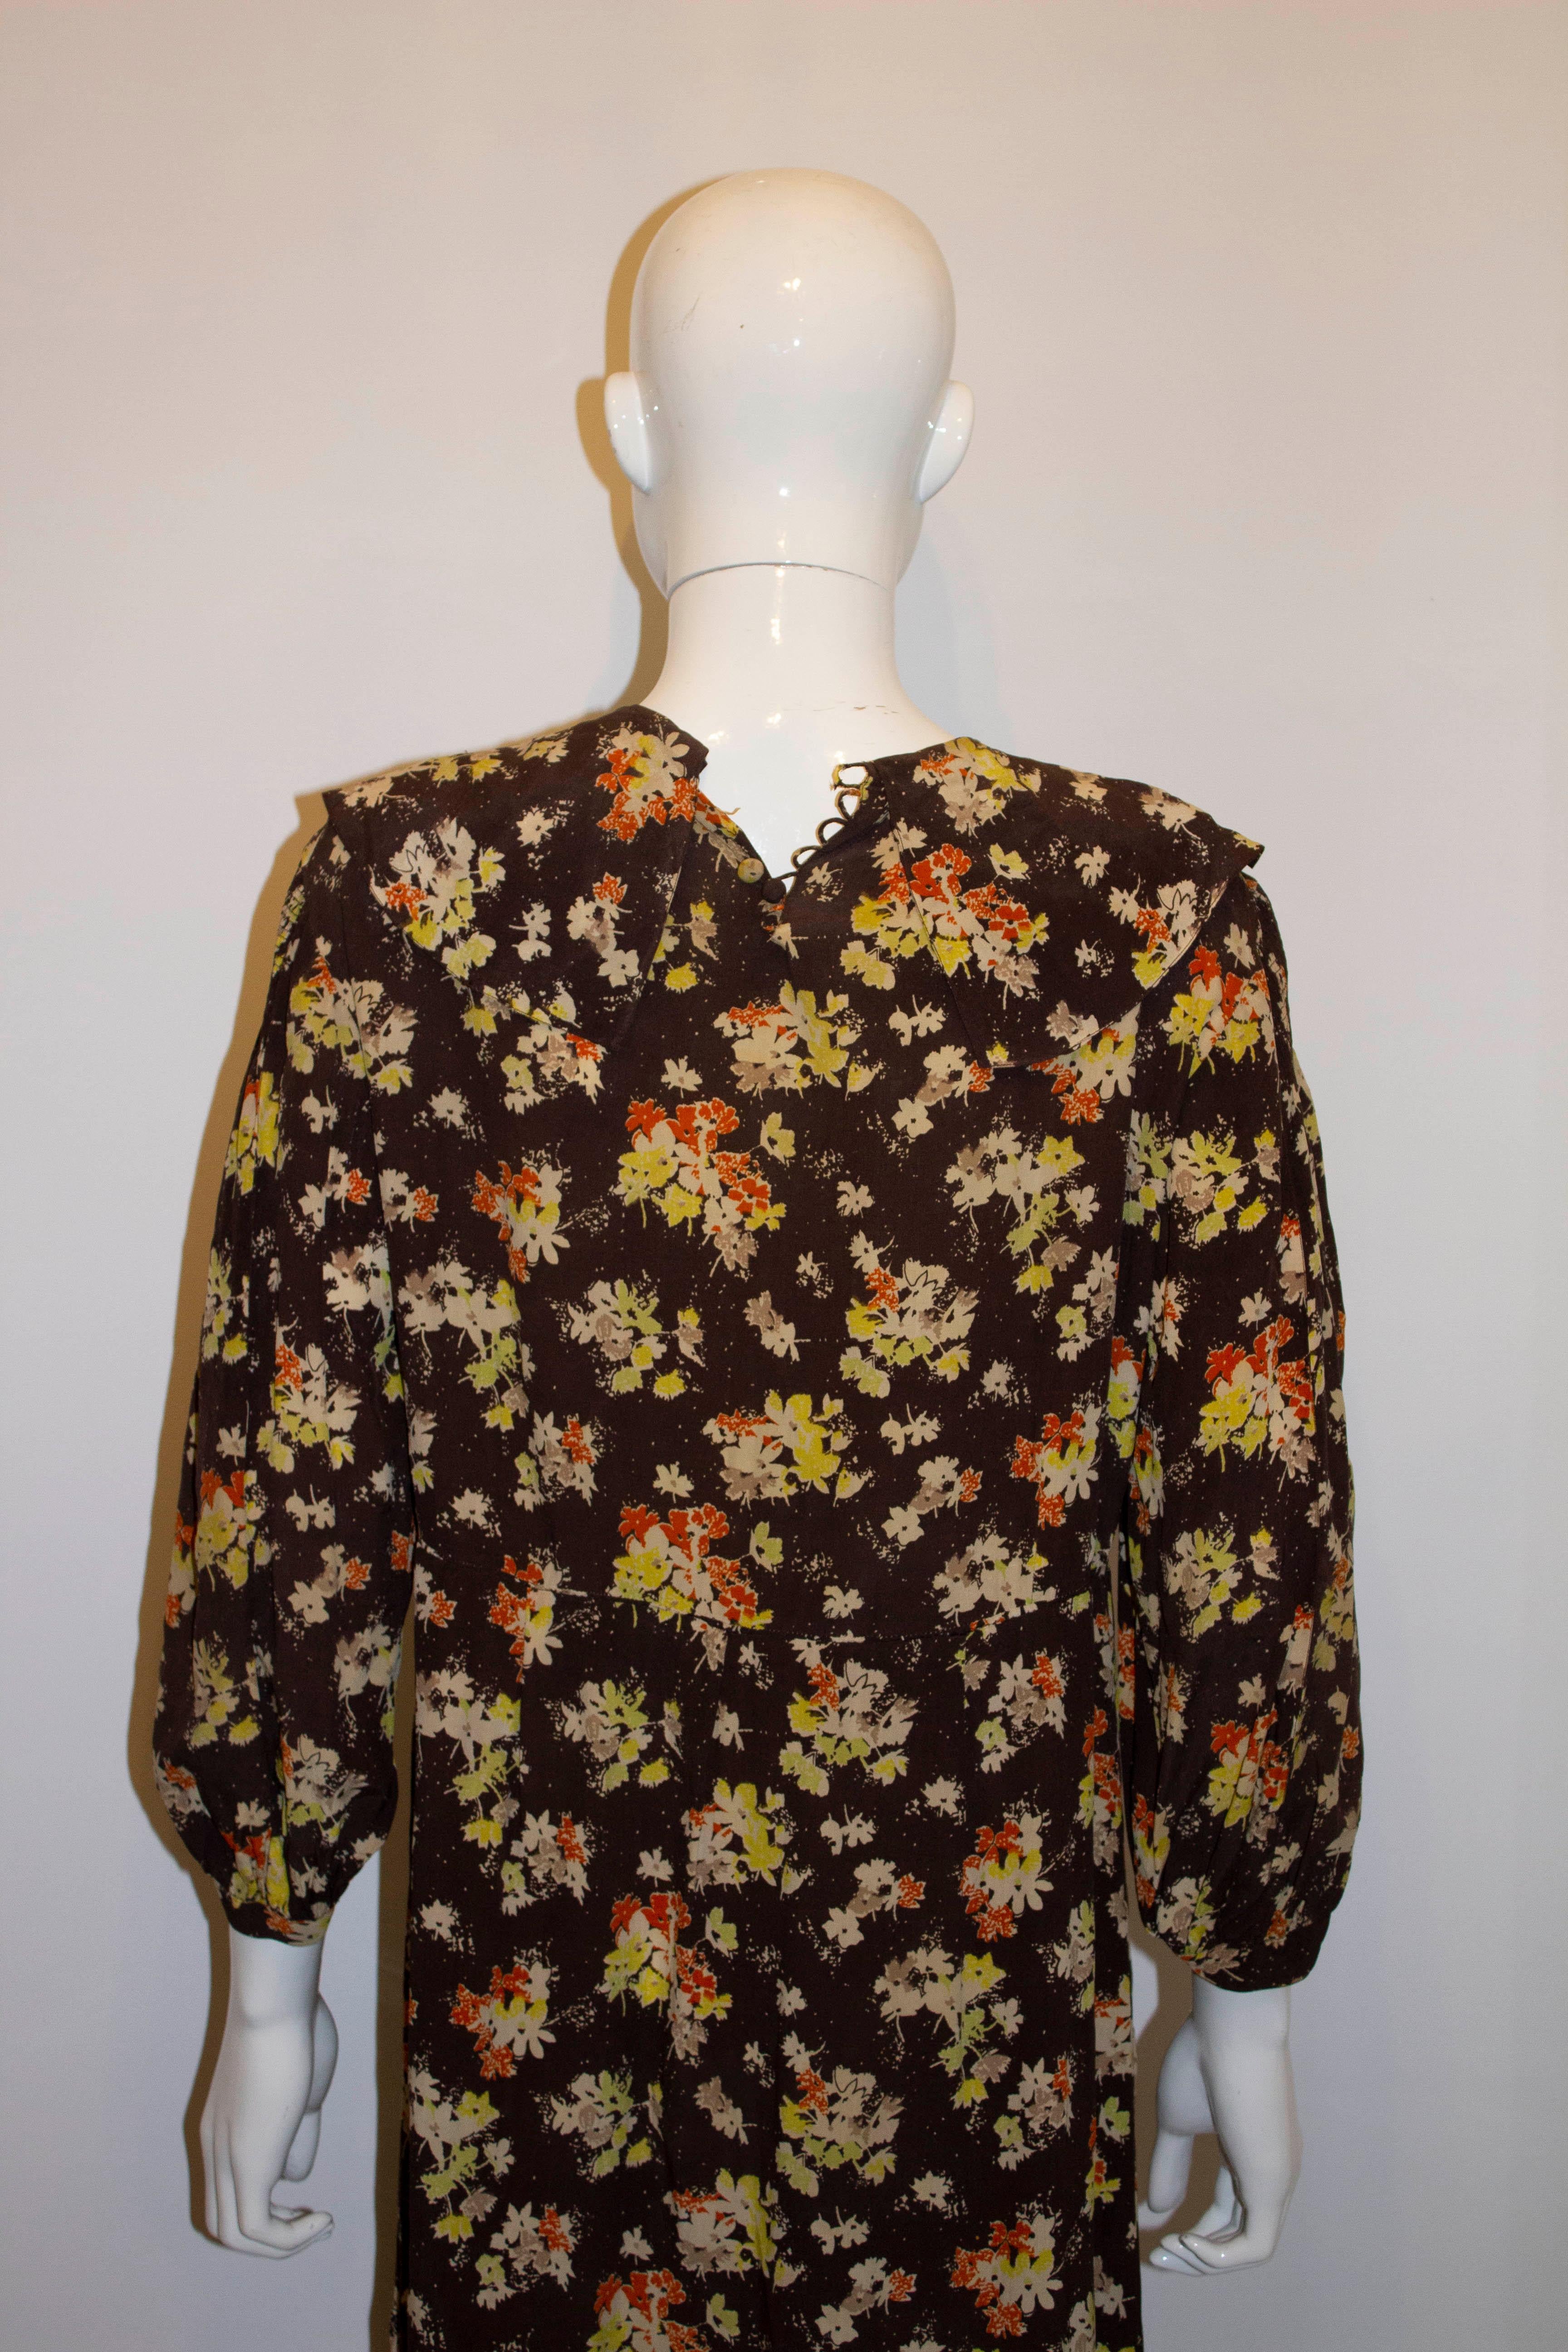 A pretty and easy to wear vintage  silk dress from the 1920s. The dress has a button opening at the back, gathering on the lower skirt and shoulders, and is in pretty brown, yellow and orange print. Measurements: Bust up to 40'', length 46''